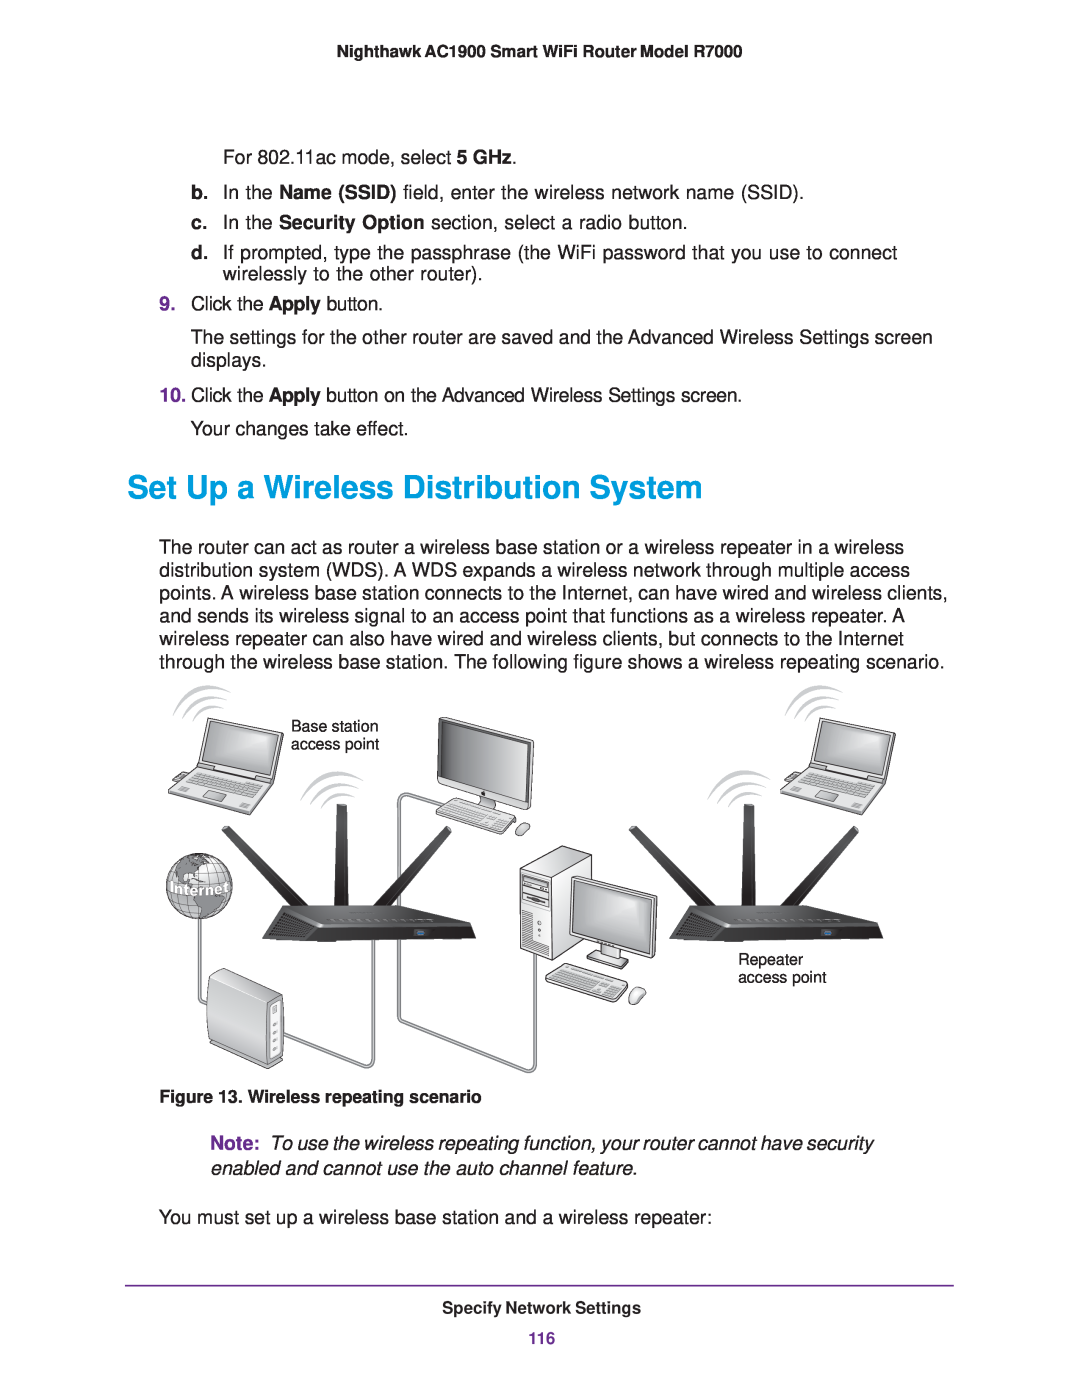 NETGEAR R7000 user manual Set Up a Wireless Distribution System, Base station access point Repeater access point 